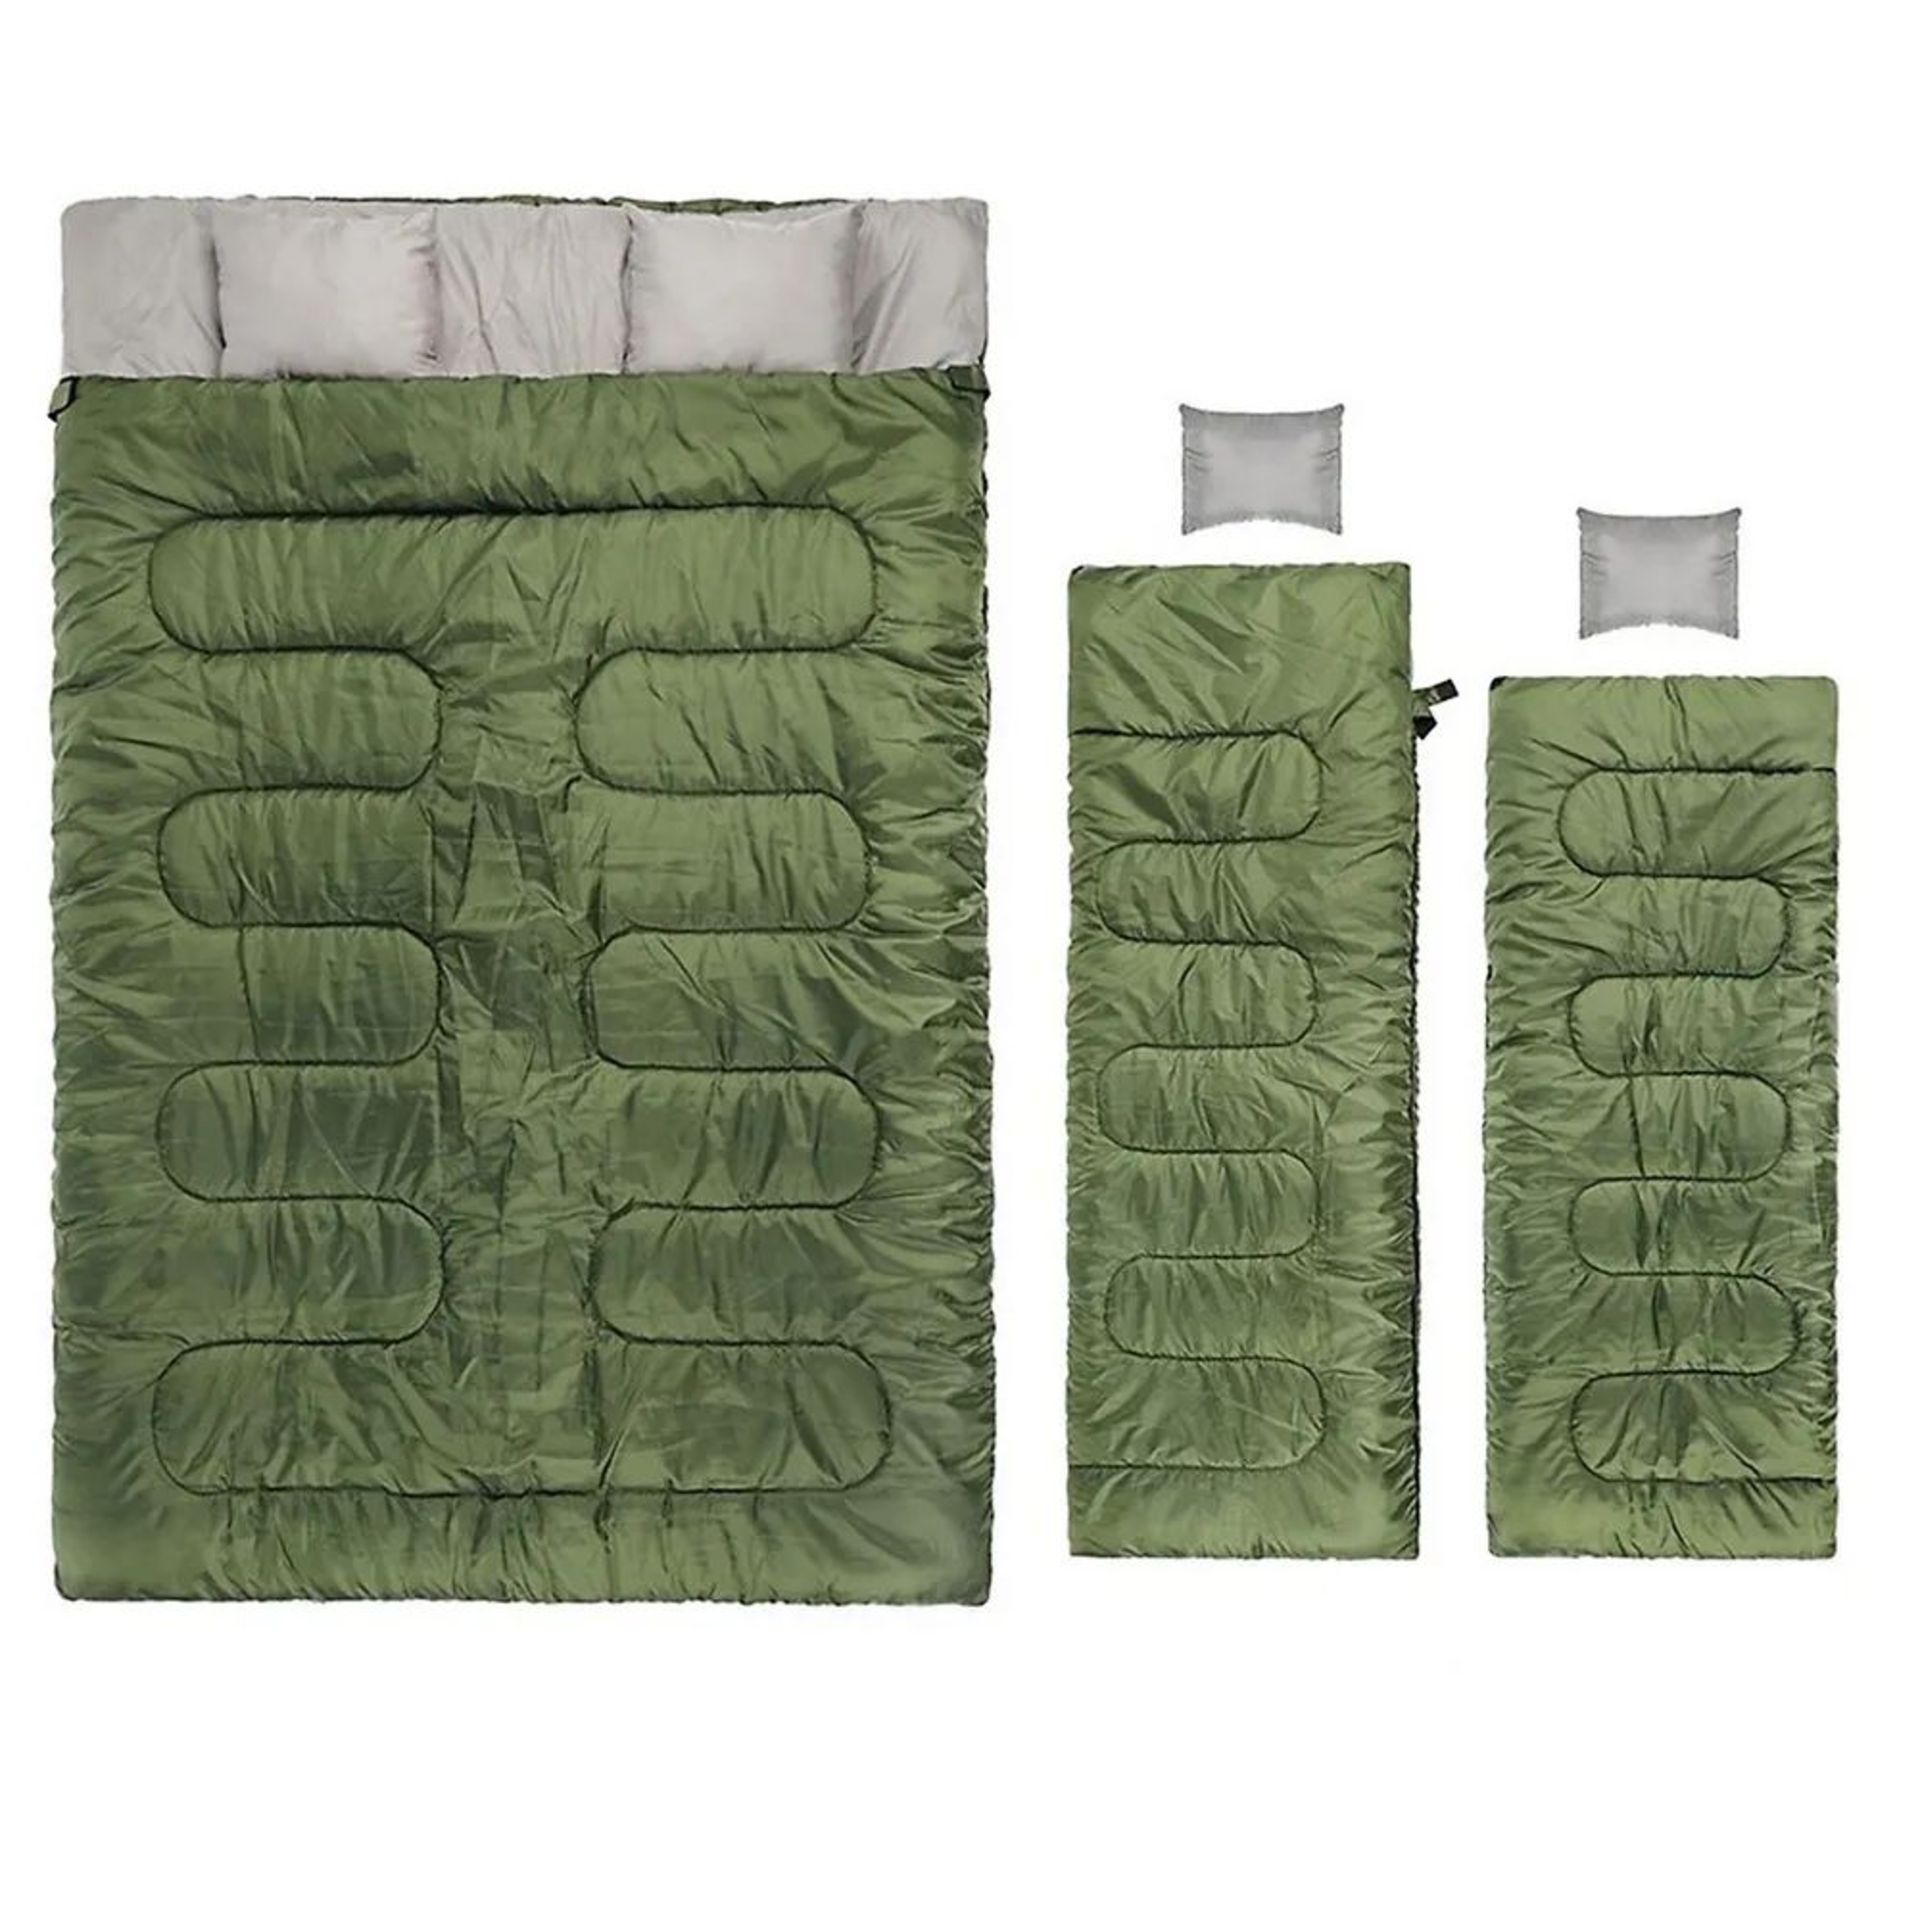 UNITS - DOUBLE SQUARE SLEEPING BAGS (NEW) (MSRP $100)